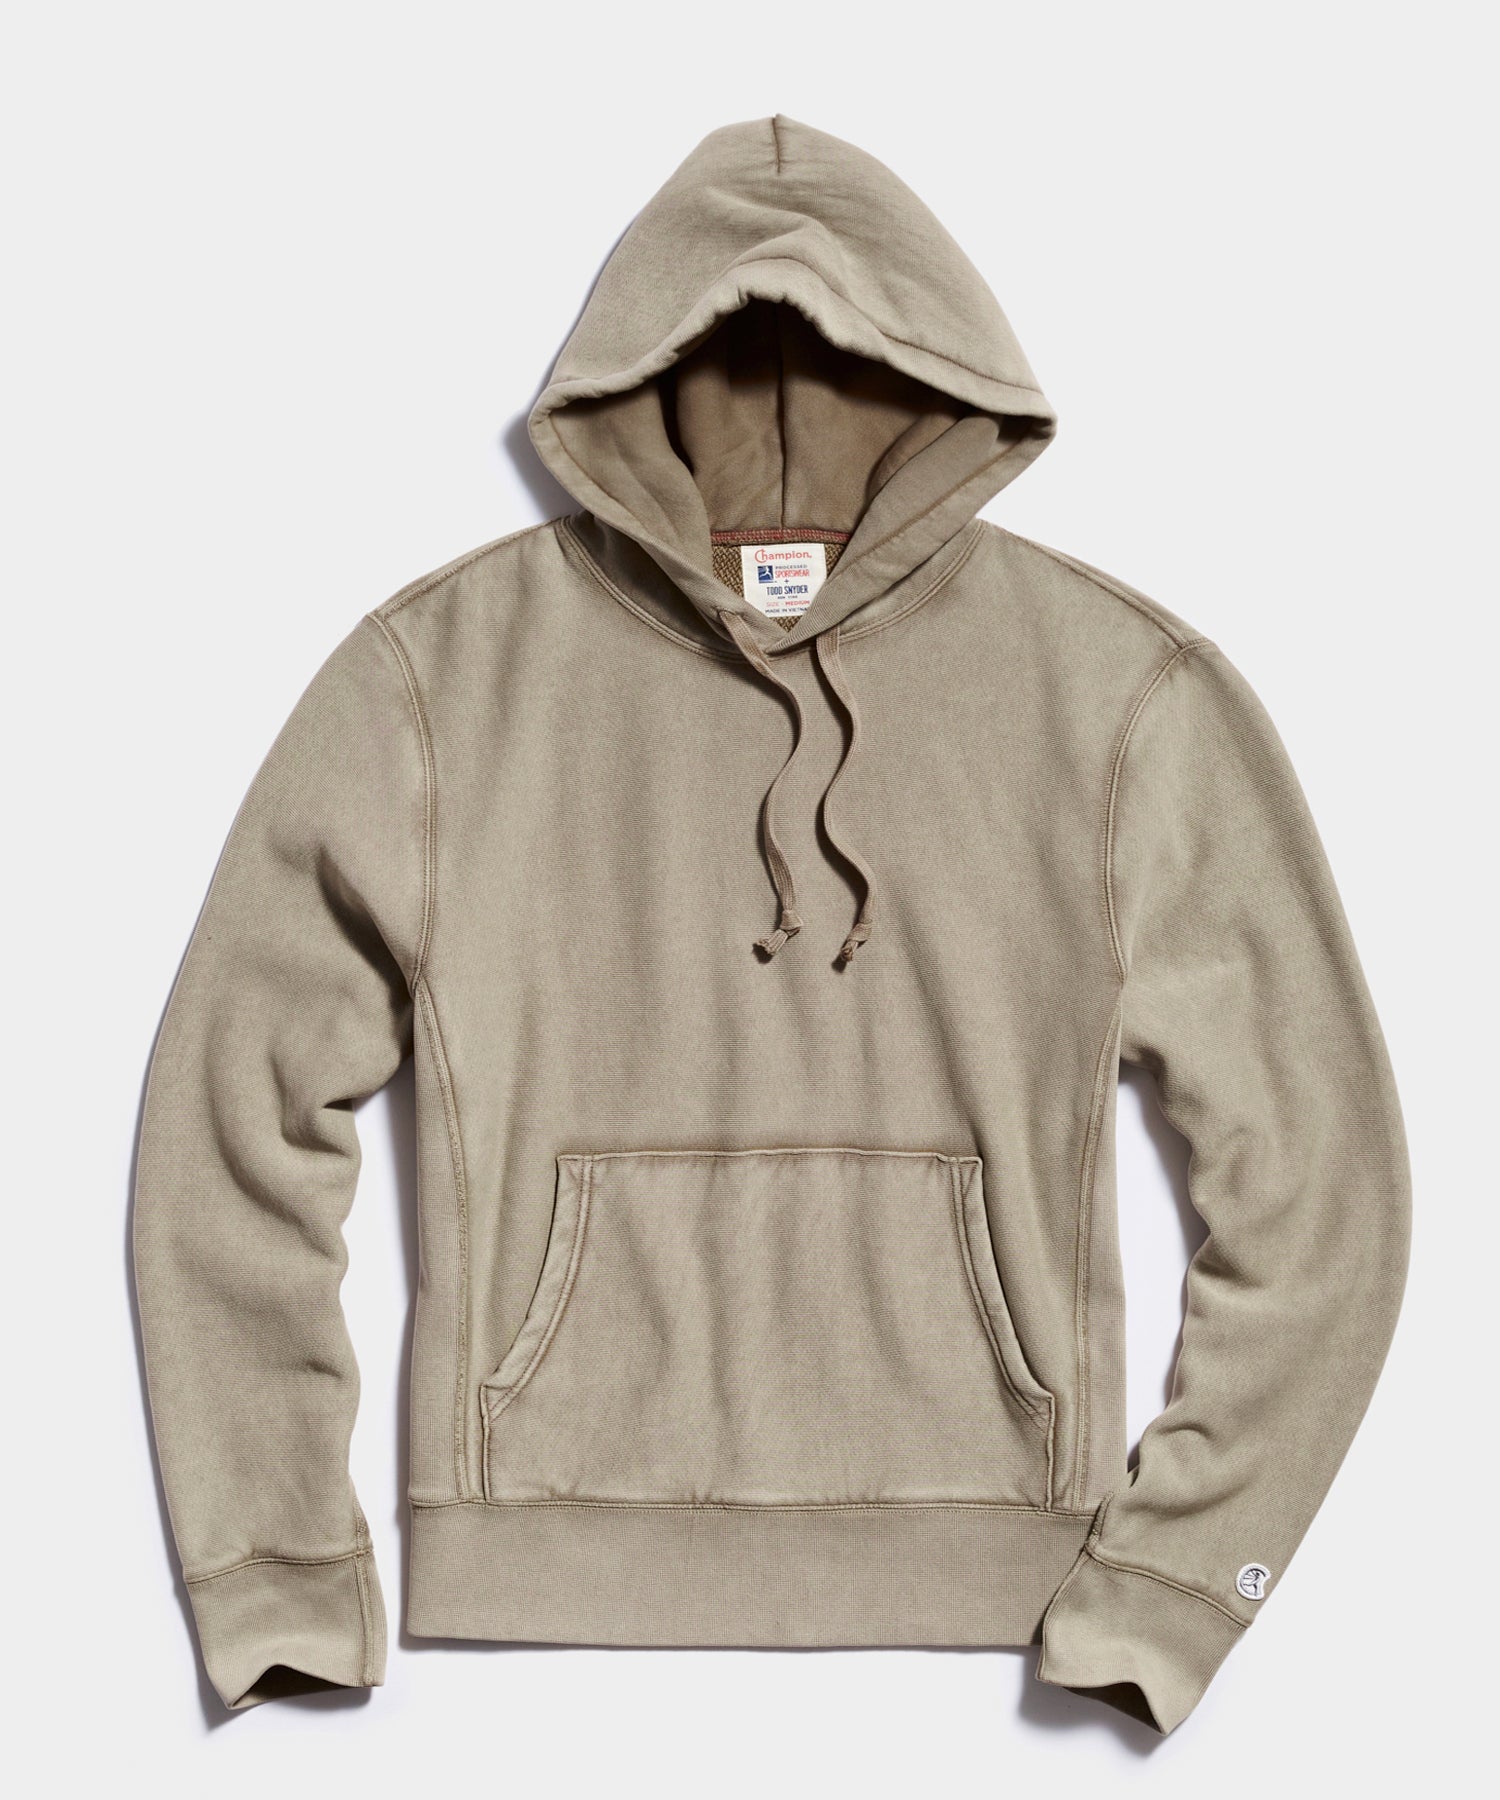 Sun-Faded Midweight Popover Hoodie Sweatshirt in Toasted Almond